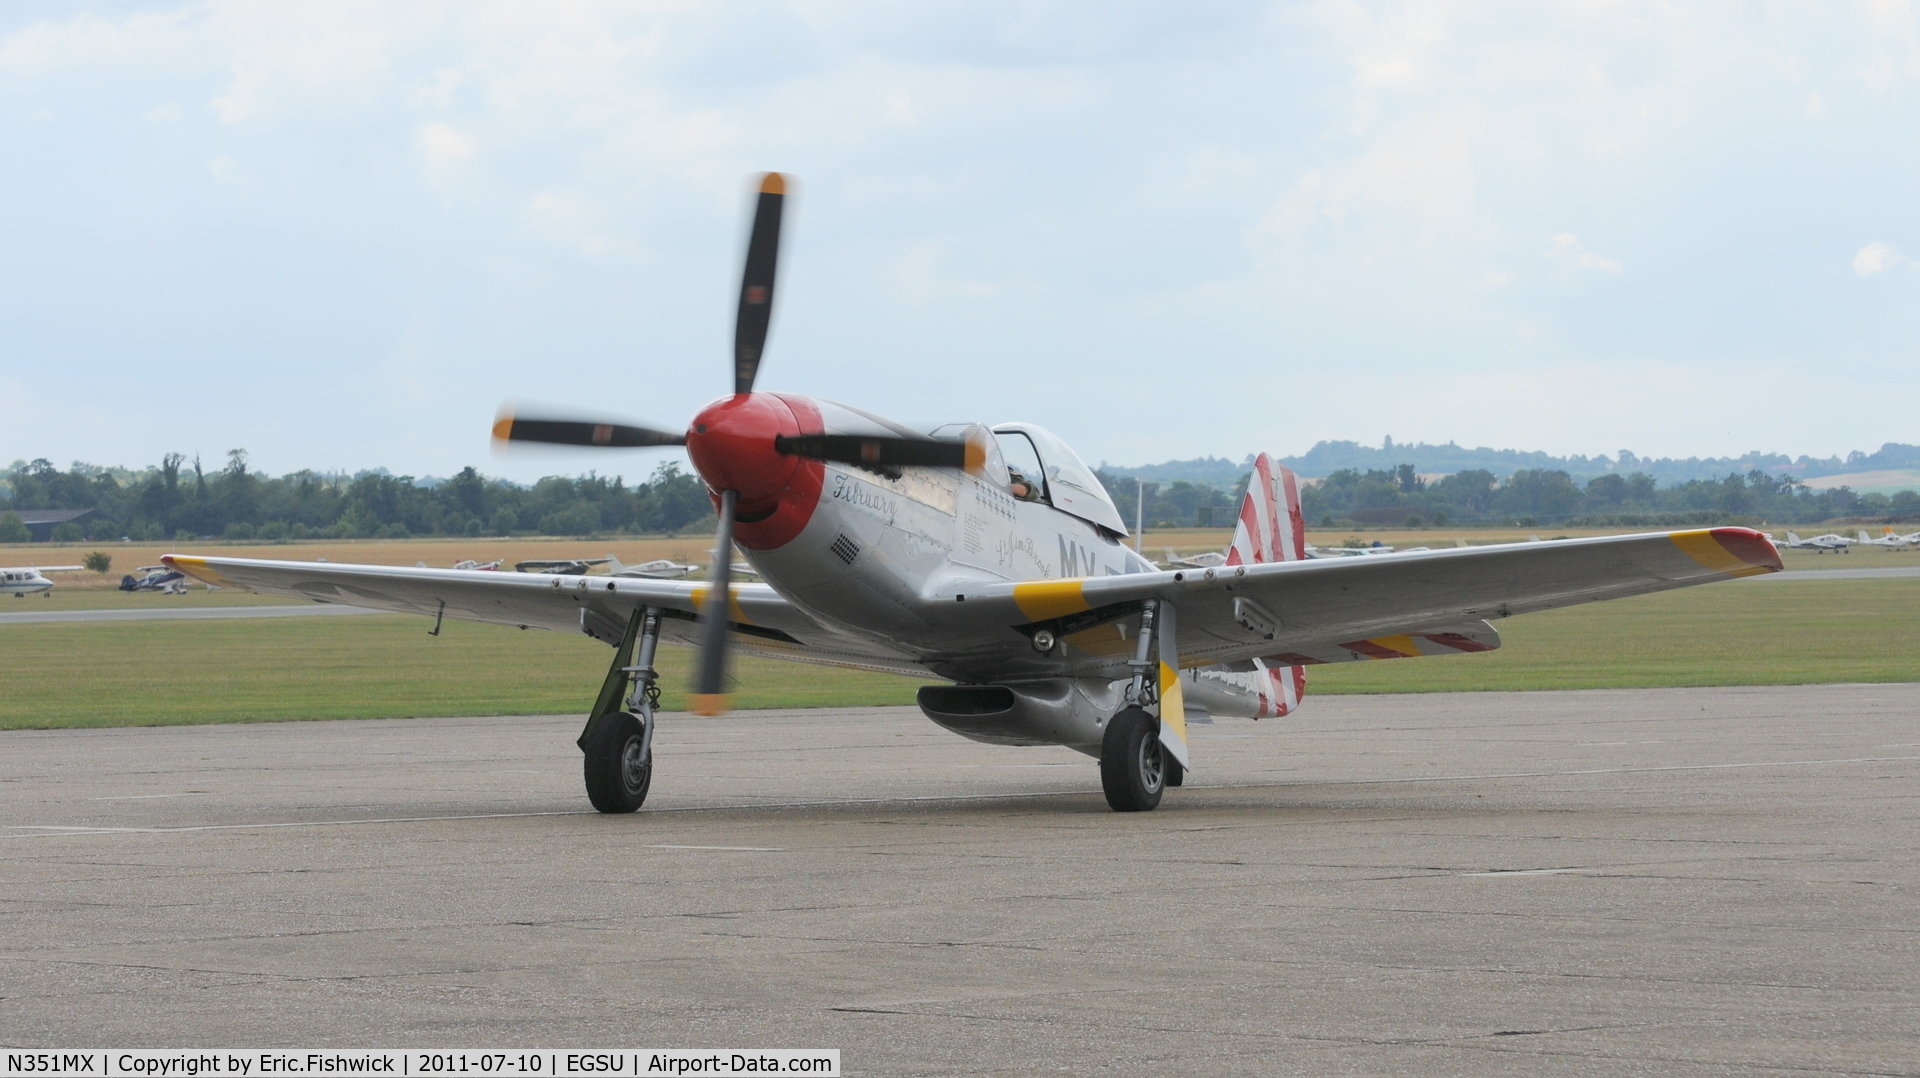 N351MX, 1944 North American P-51D Mustang C/N 122-40931 (44-74391), N351MX  at Flying Legends Air Show, July 2011